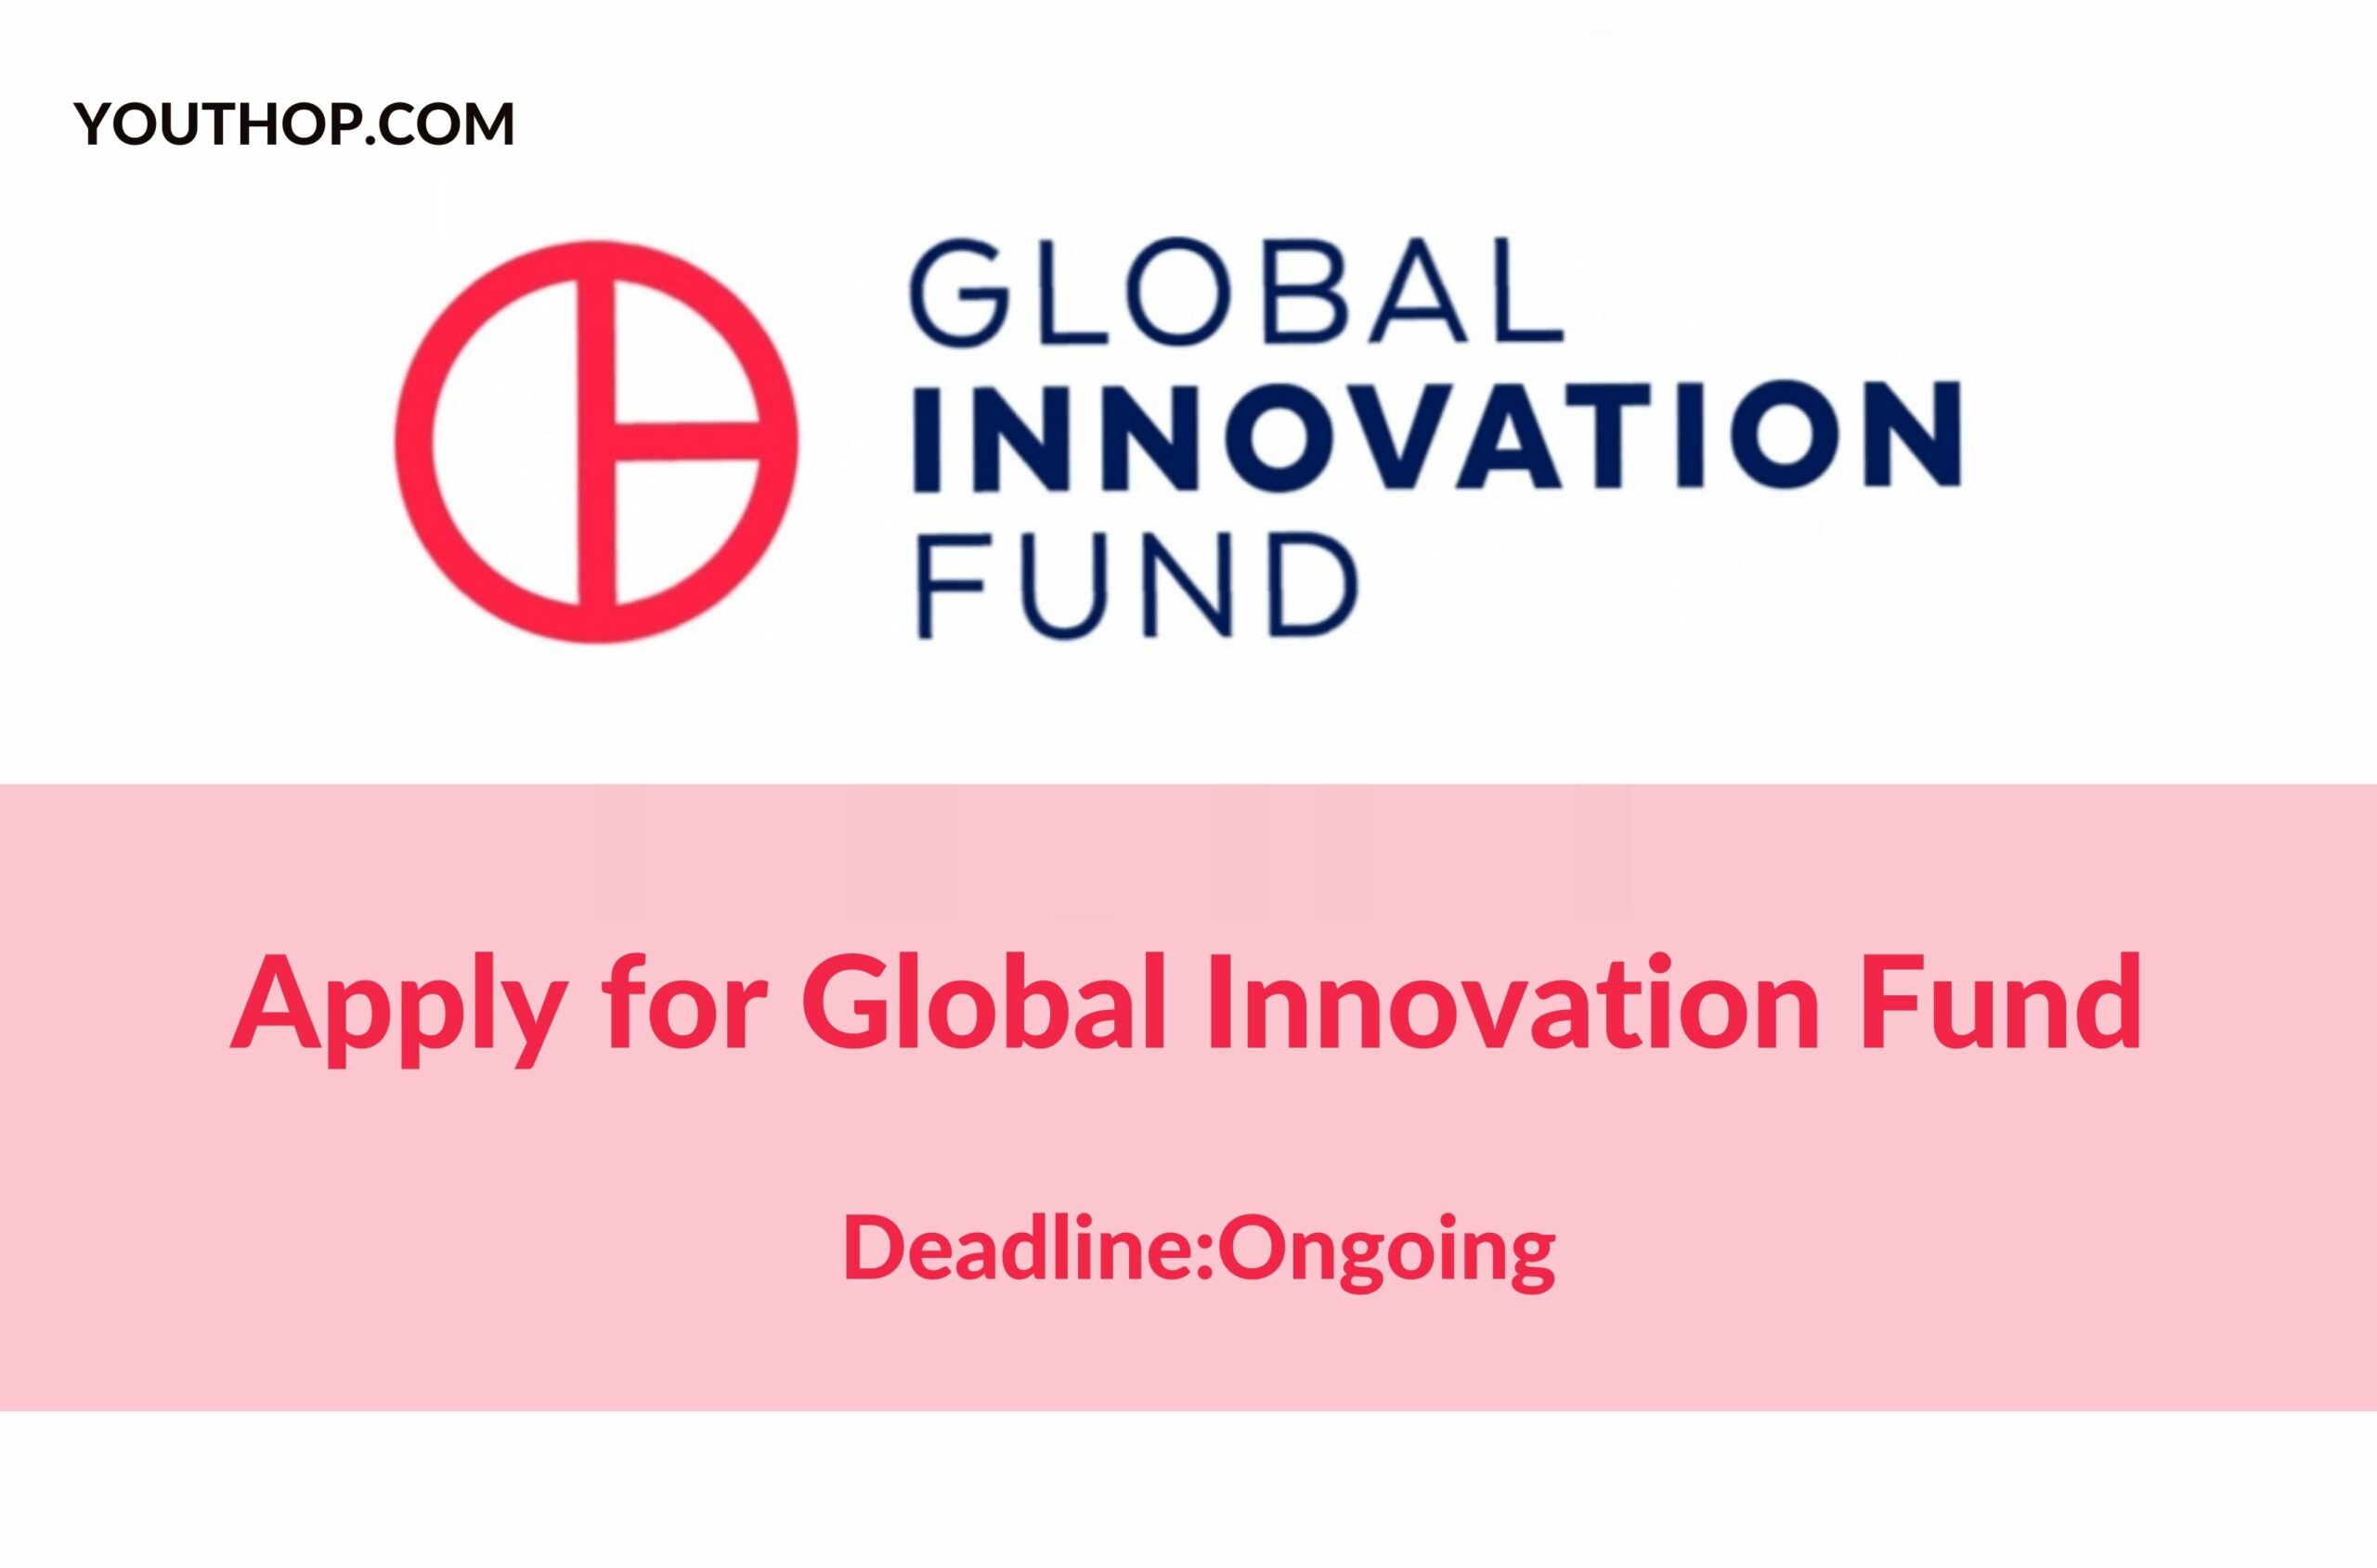 What is the Global Innovation Fund Program?